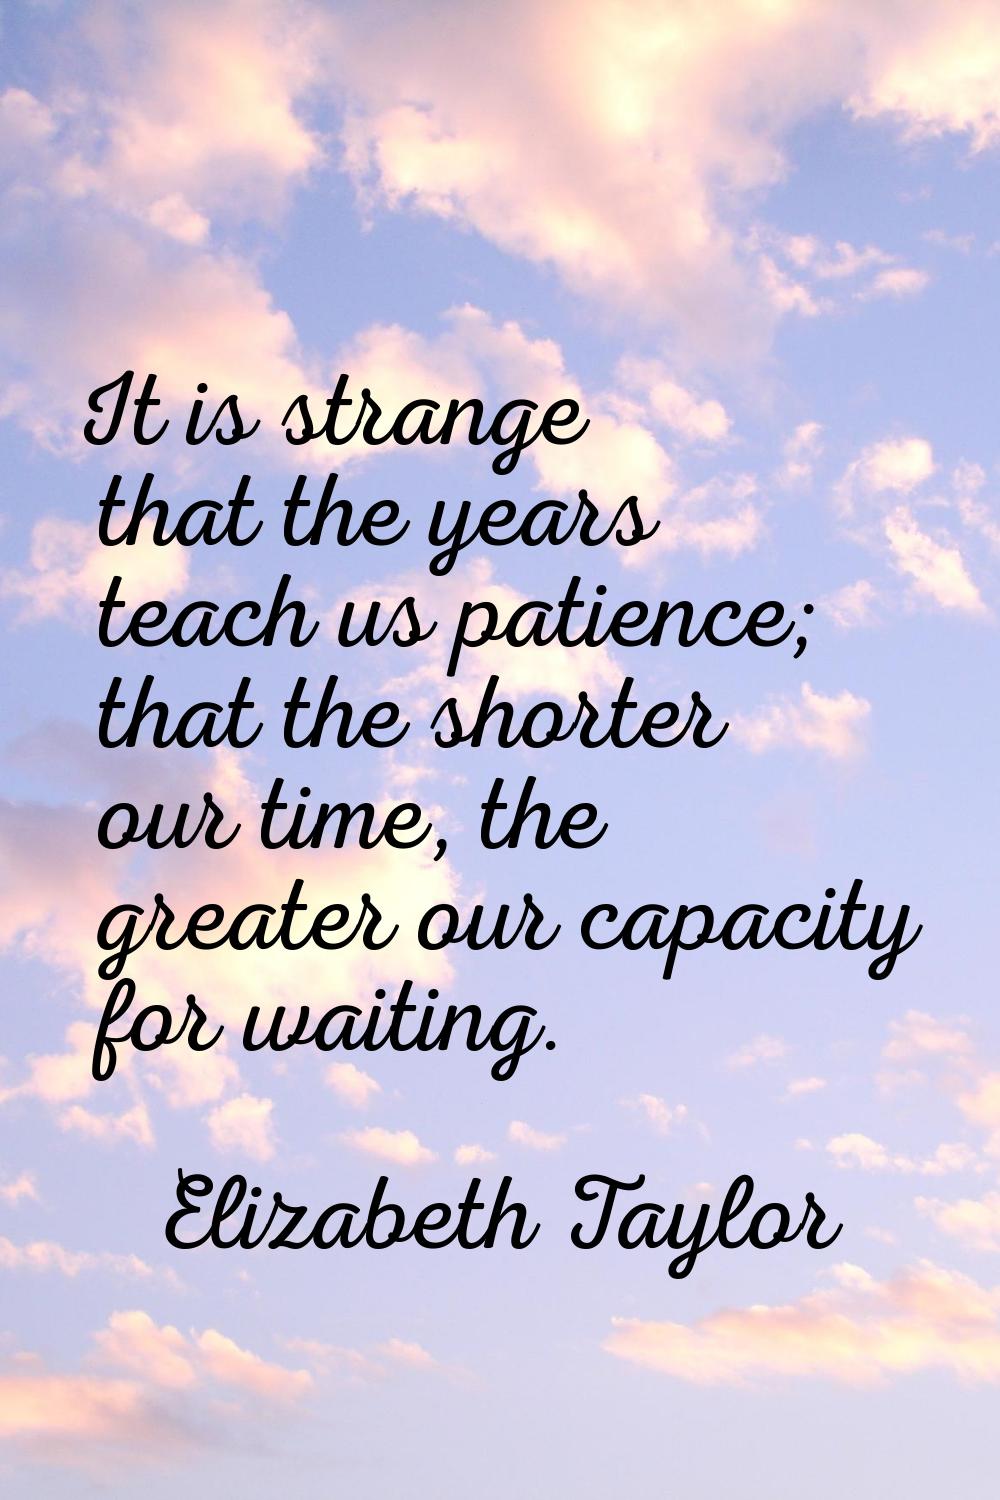 It is strange that the years teach us patience; that the shorter our time, the greater our capacity